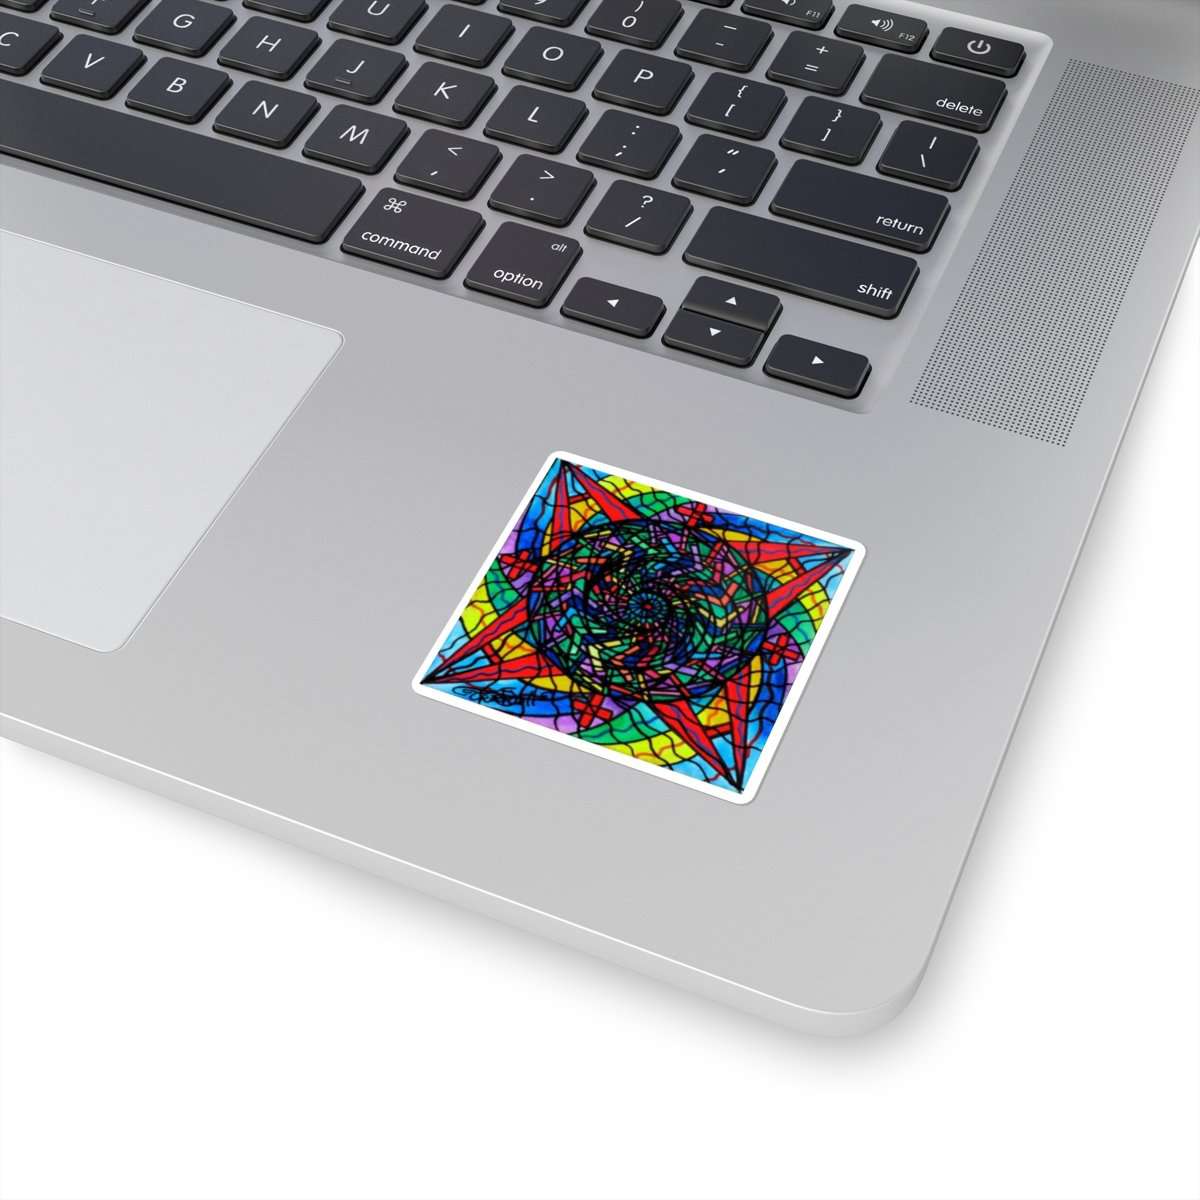 welcome-to-buy-academic-fulfillment-square-stickers-online-hot-sale_1.jpg